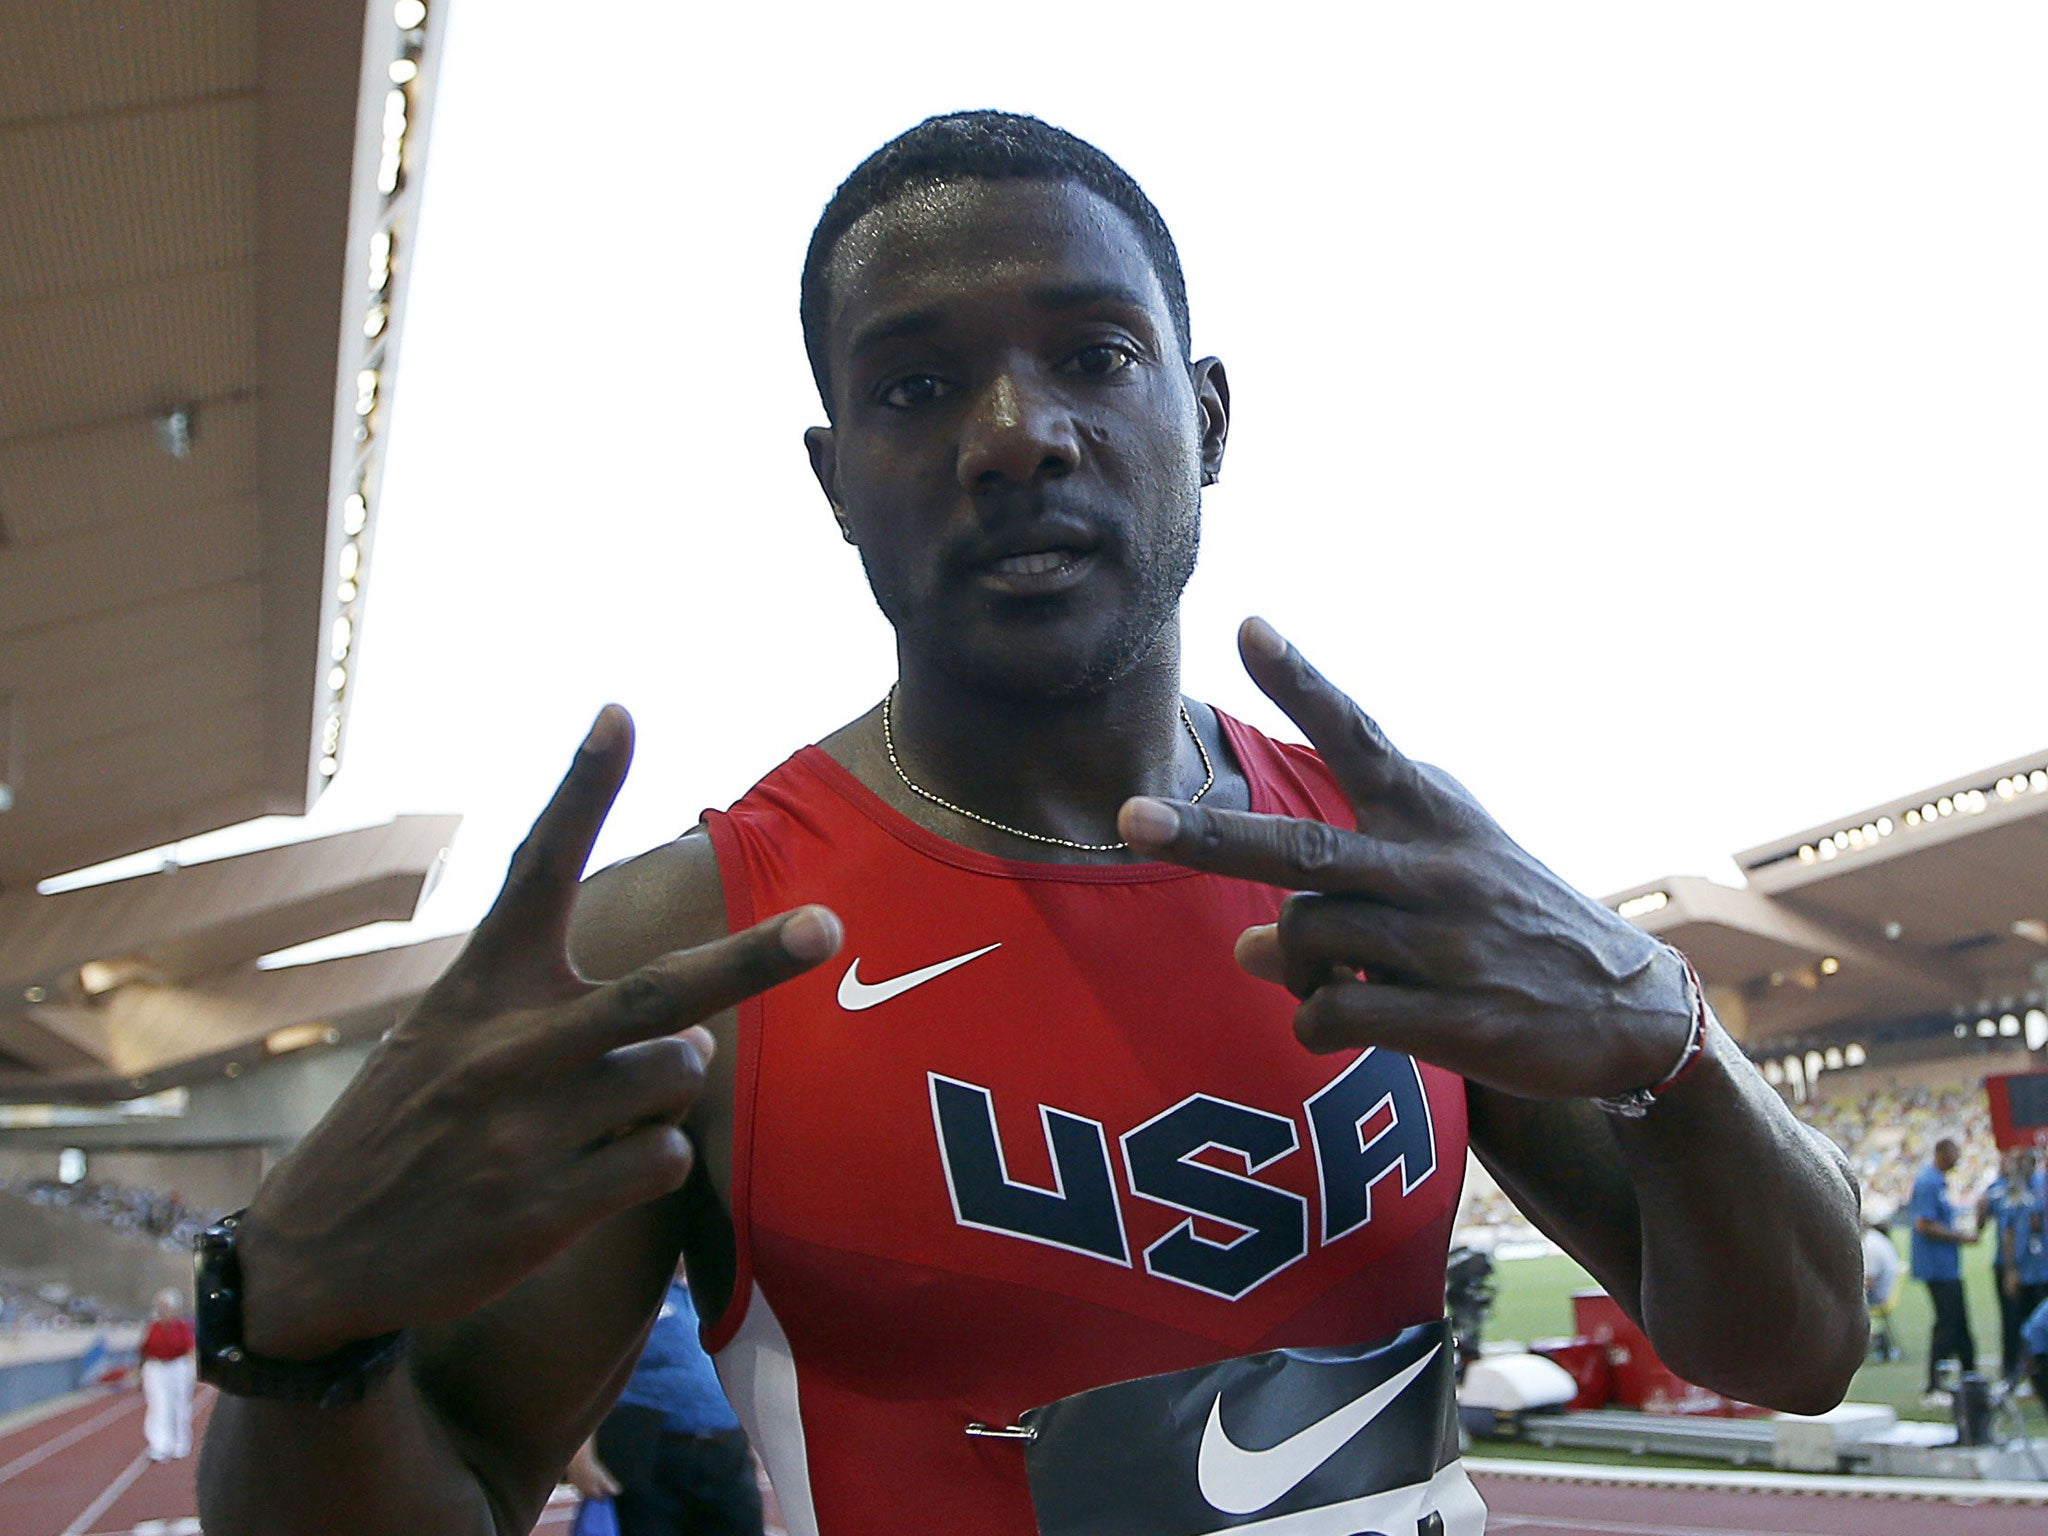 Drug cheats such as Justin Gatlin have damaged the entire athletics community